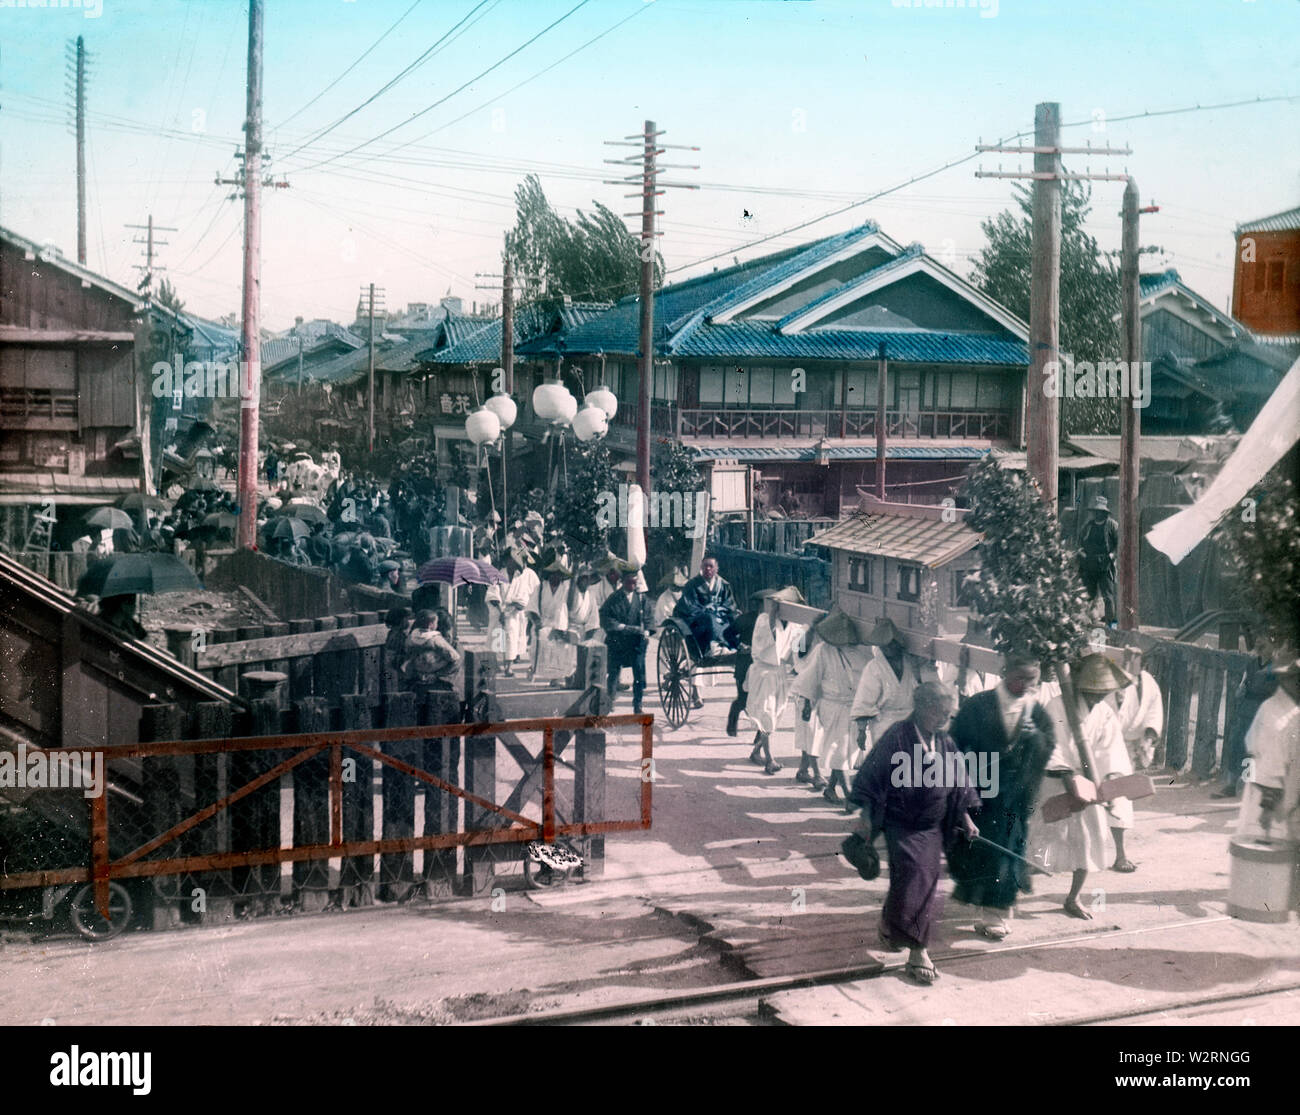 [ 1900s Japan - Japanese Funeral Procession ] —   A funeral procession crosses train tracks. This image can also be found in a book published by Japanese photographer Teijiro Takagi in 1908 (Meiji 41), conveniently dating this image.  20th century vintage glass slide. Stock Photo